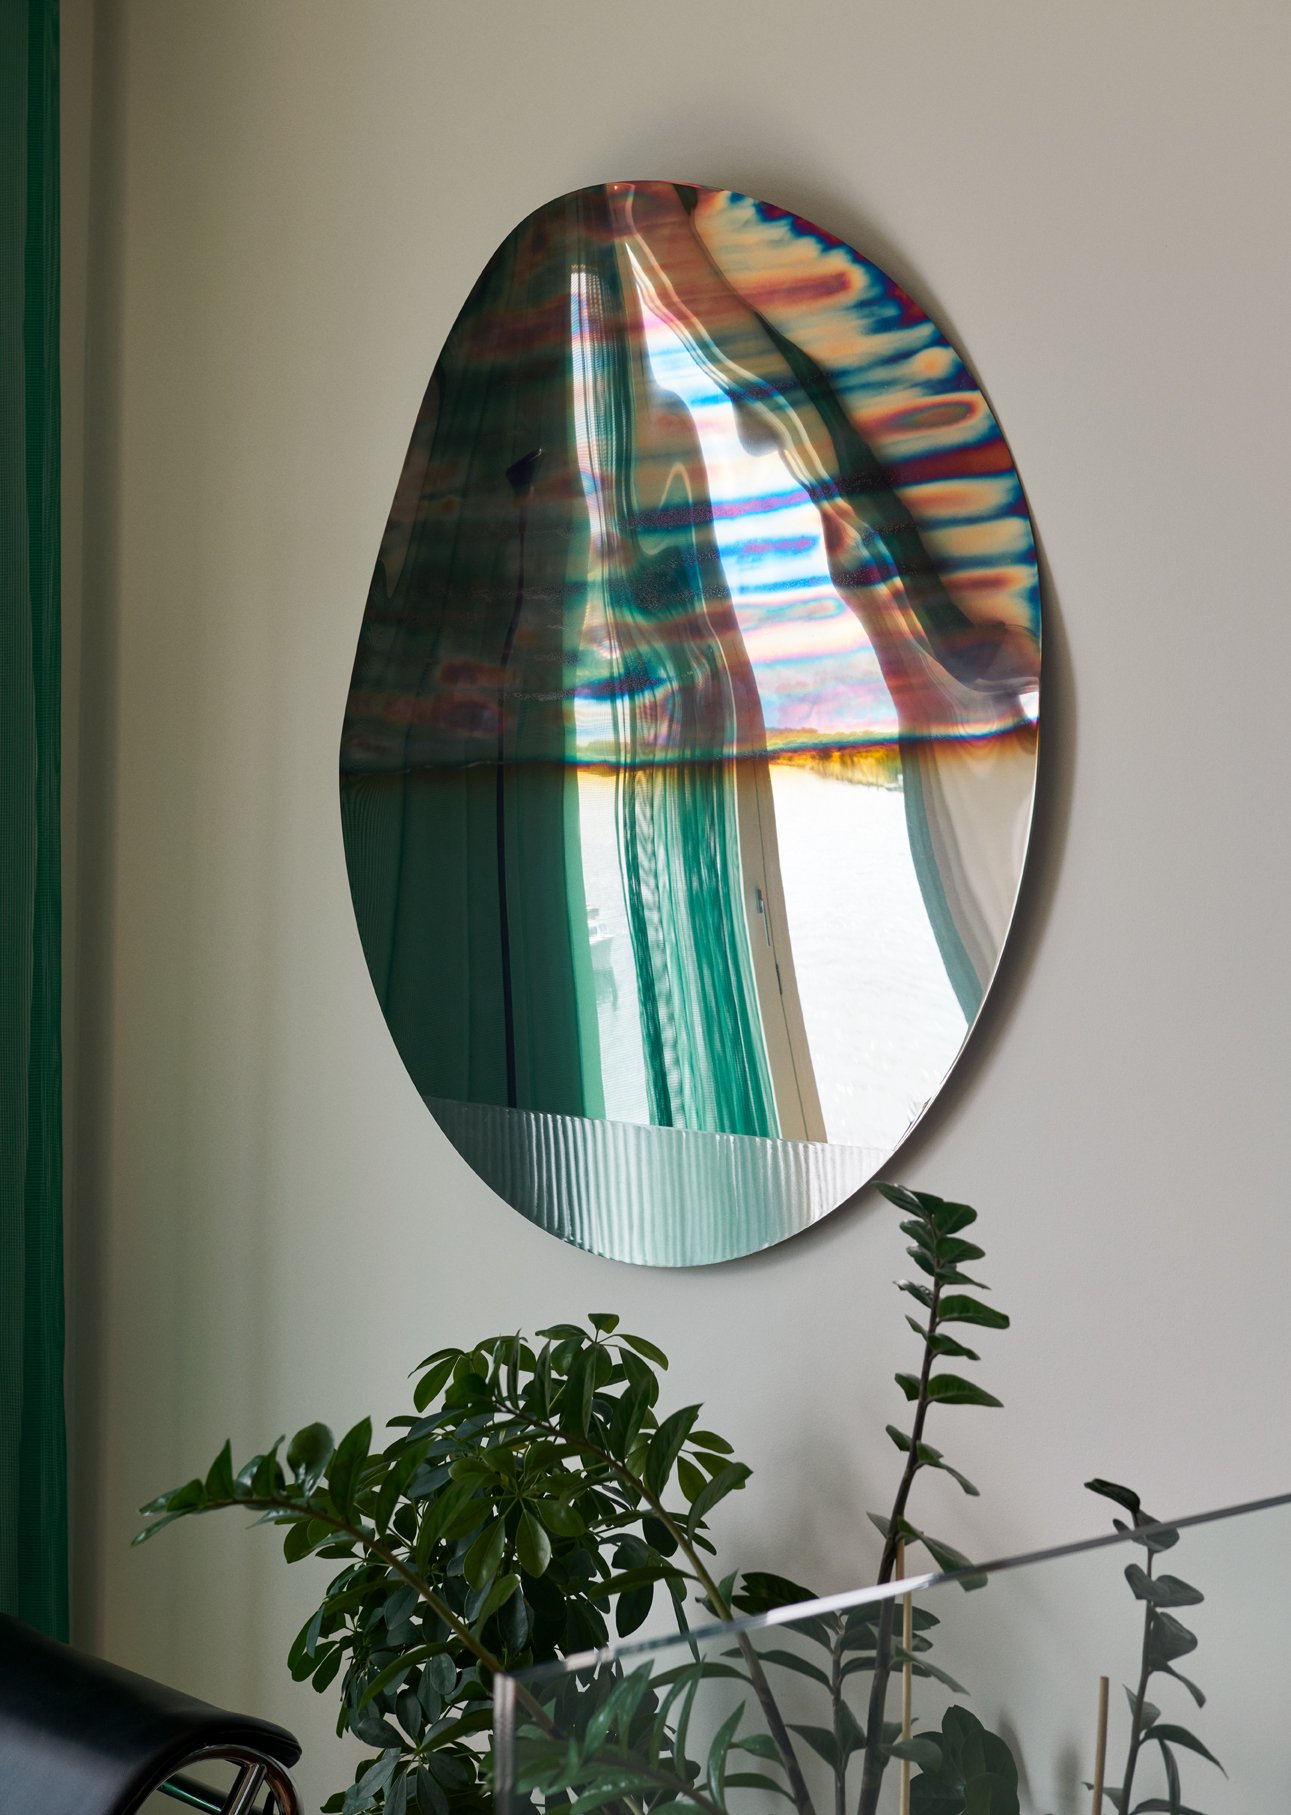  Denys’s ‘Self Reflect 107’ mirror, mounted on the living-room wall. The series originated as one of the designer’s graduation projects at Design Academy Eindhoven. Select pieces are now available via Carpenters Workshop Gallery 